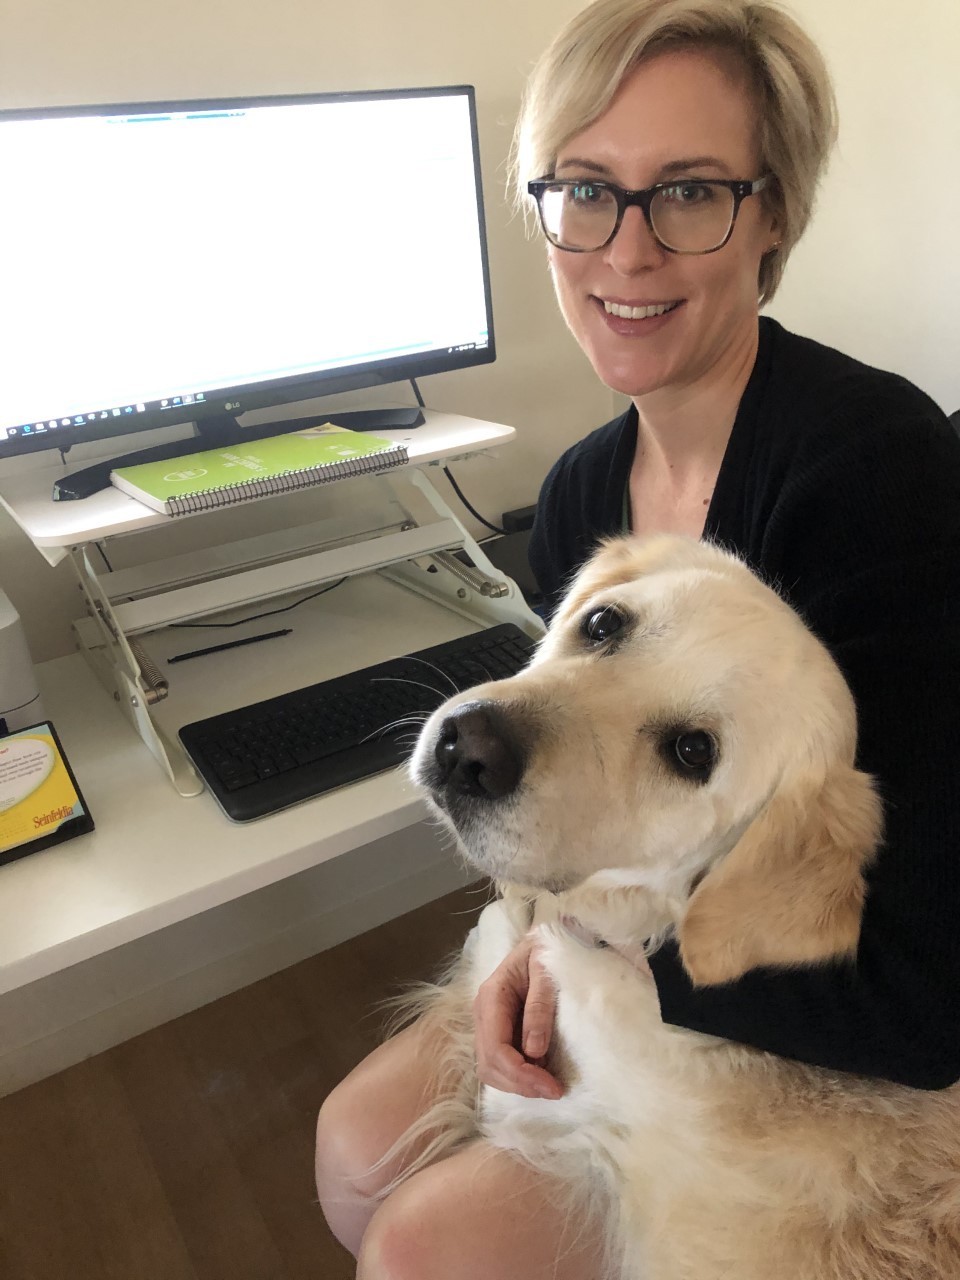 Library technician Kristina Read and her dog Moose working from home - sitting at a computer together